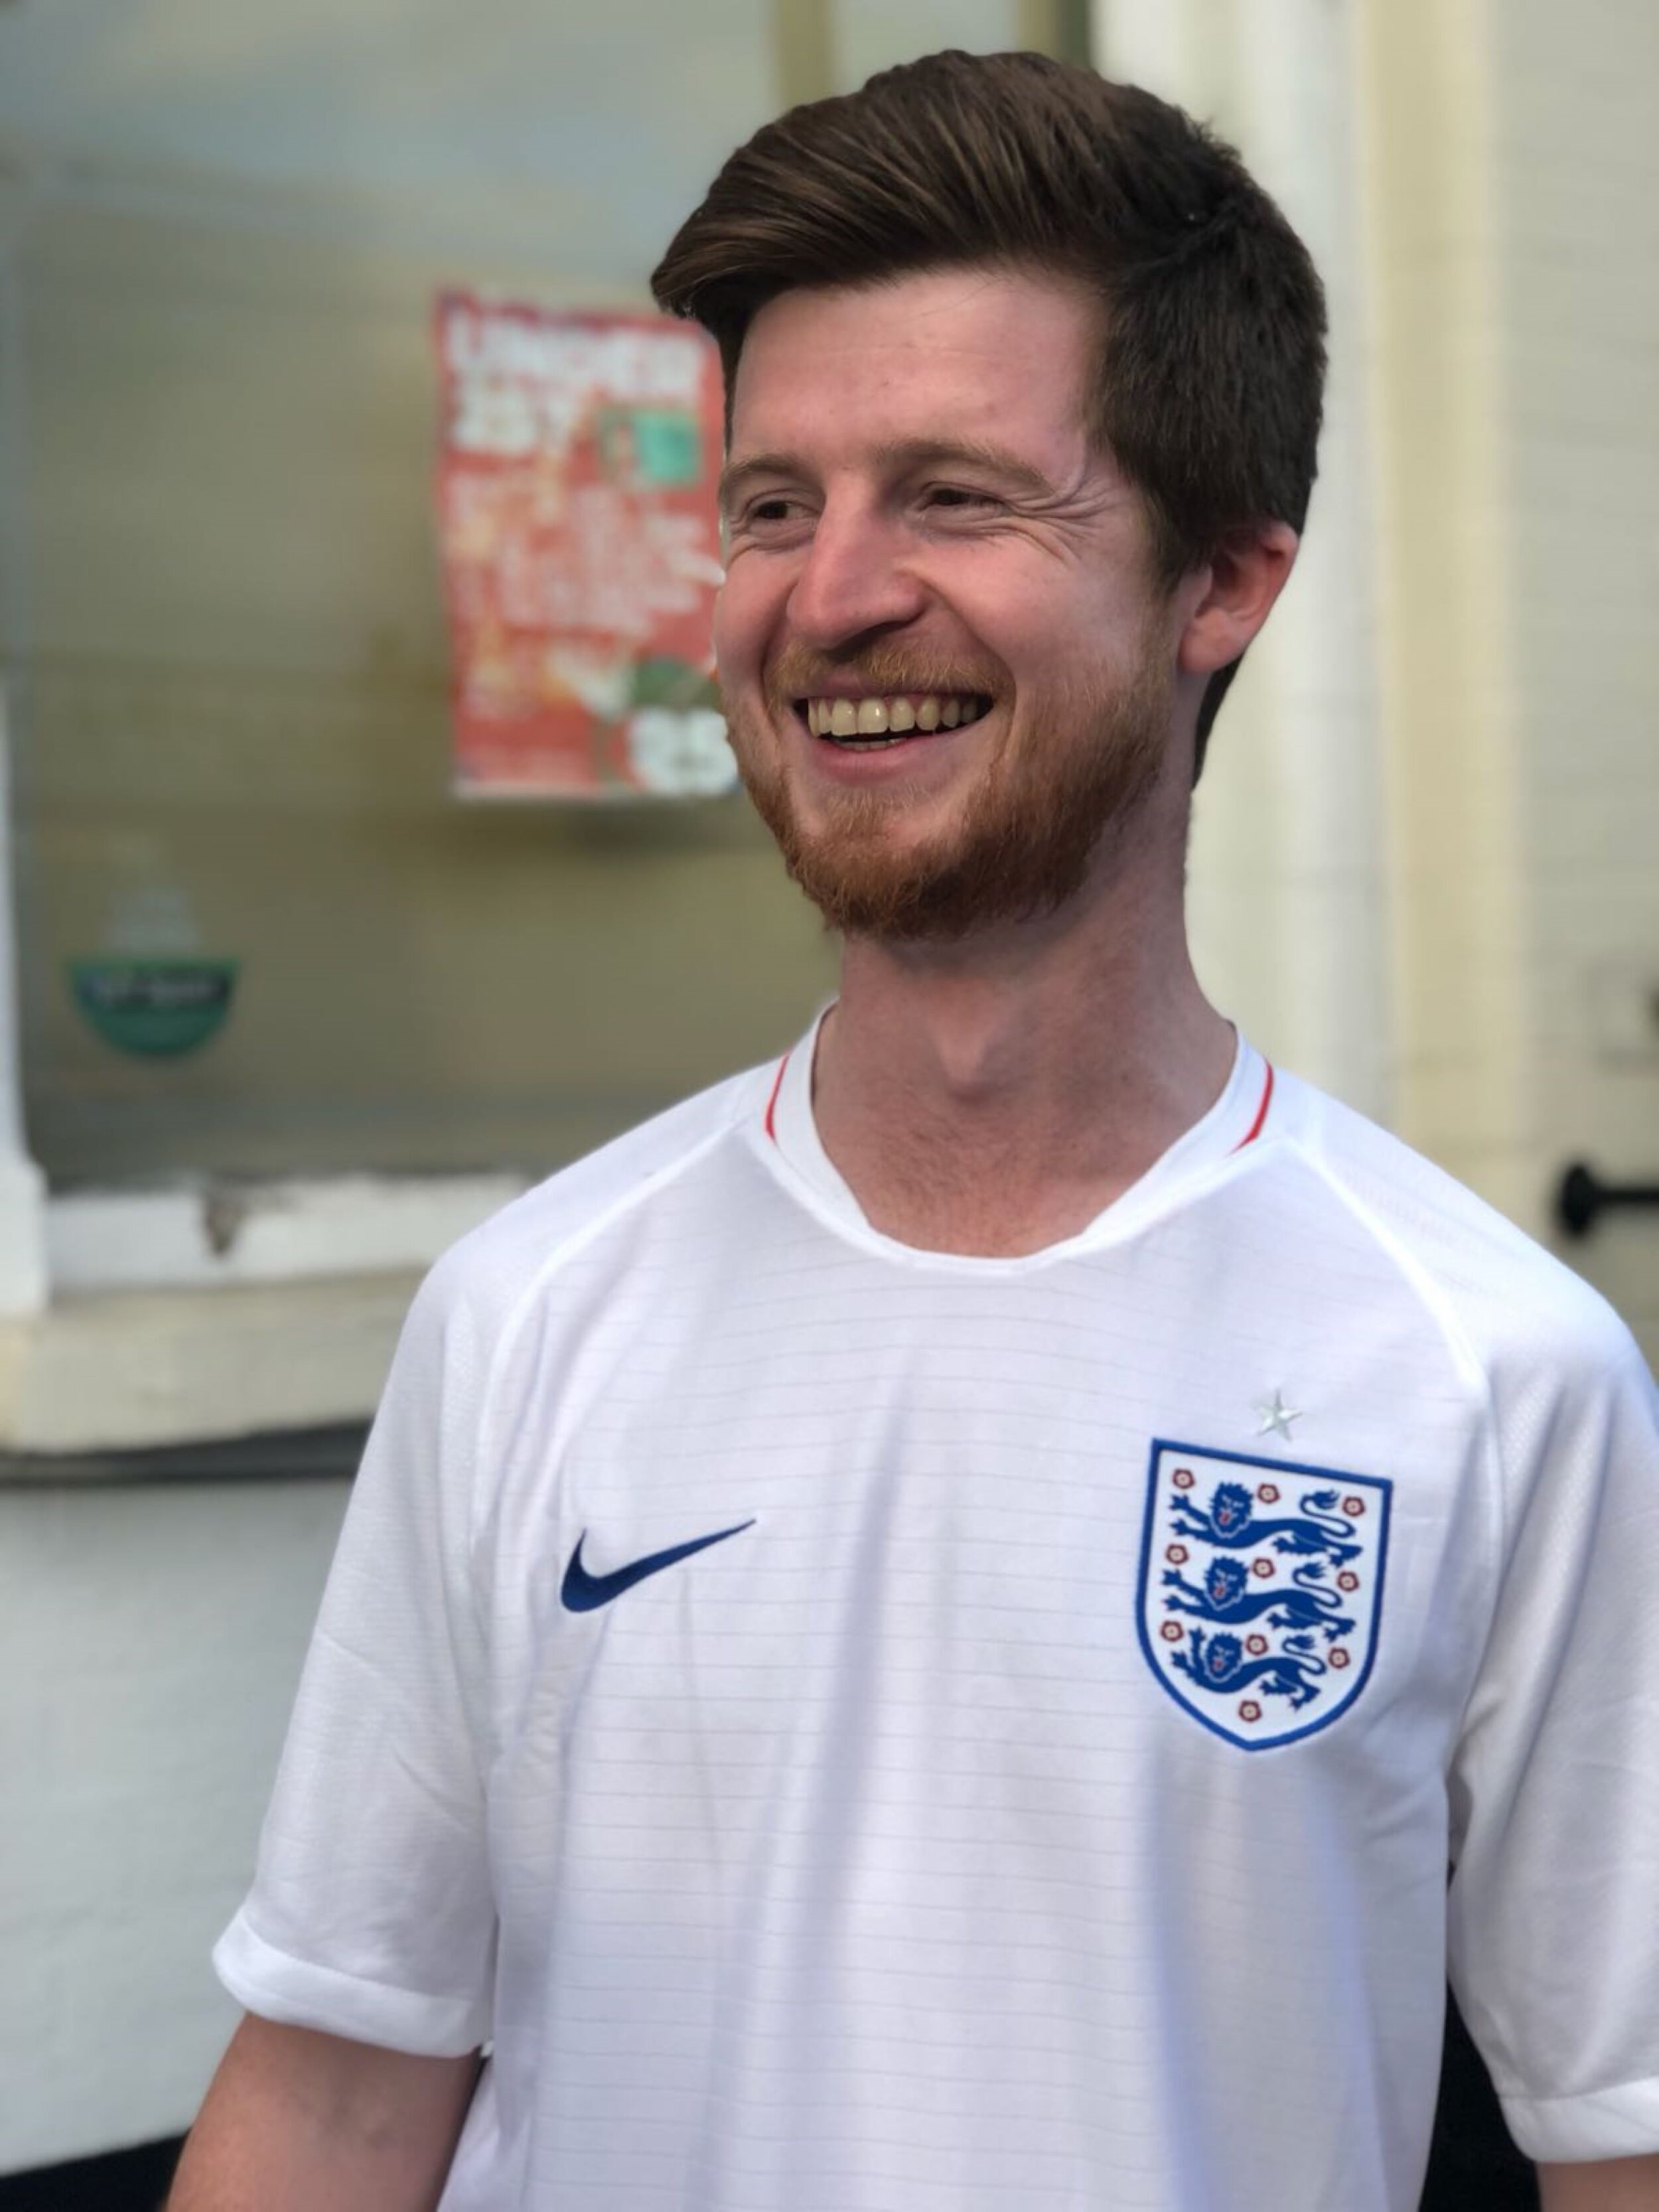 Alex taking in an England victory during the 2018 World Cup. He's wearing a white England football shirt and is beaming. Photo supplied.JPG